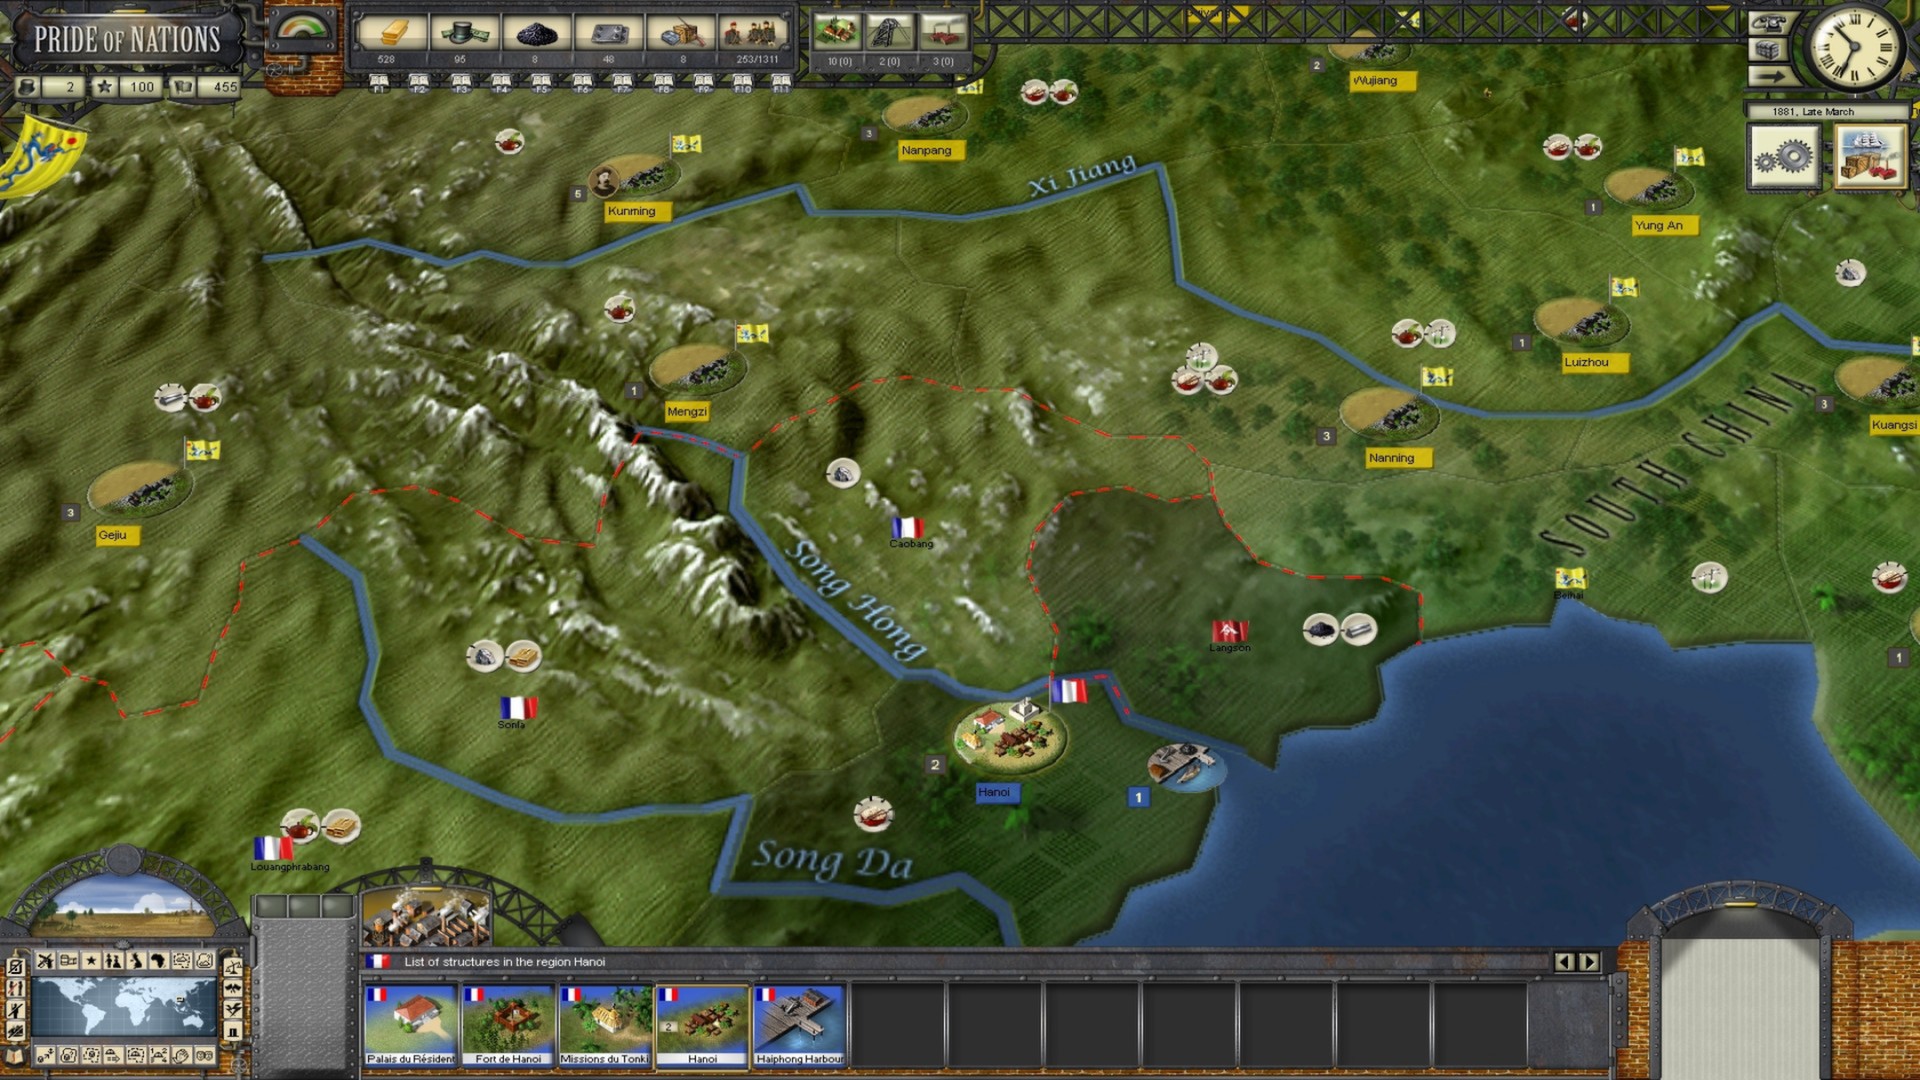 Pride of Nations: The Scramble for Africa Featured Screenshot #1